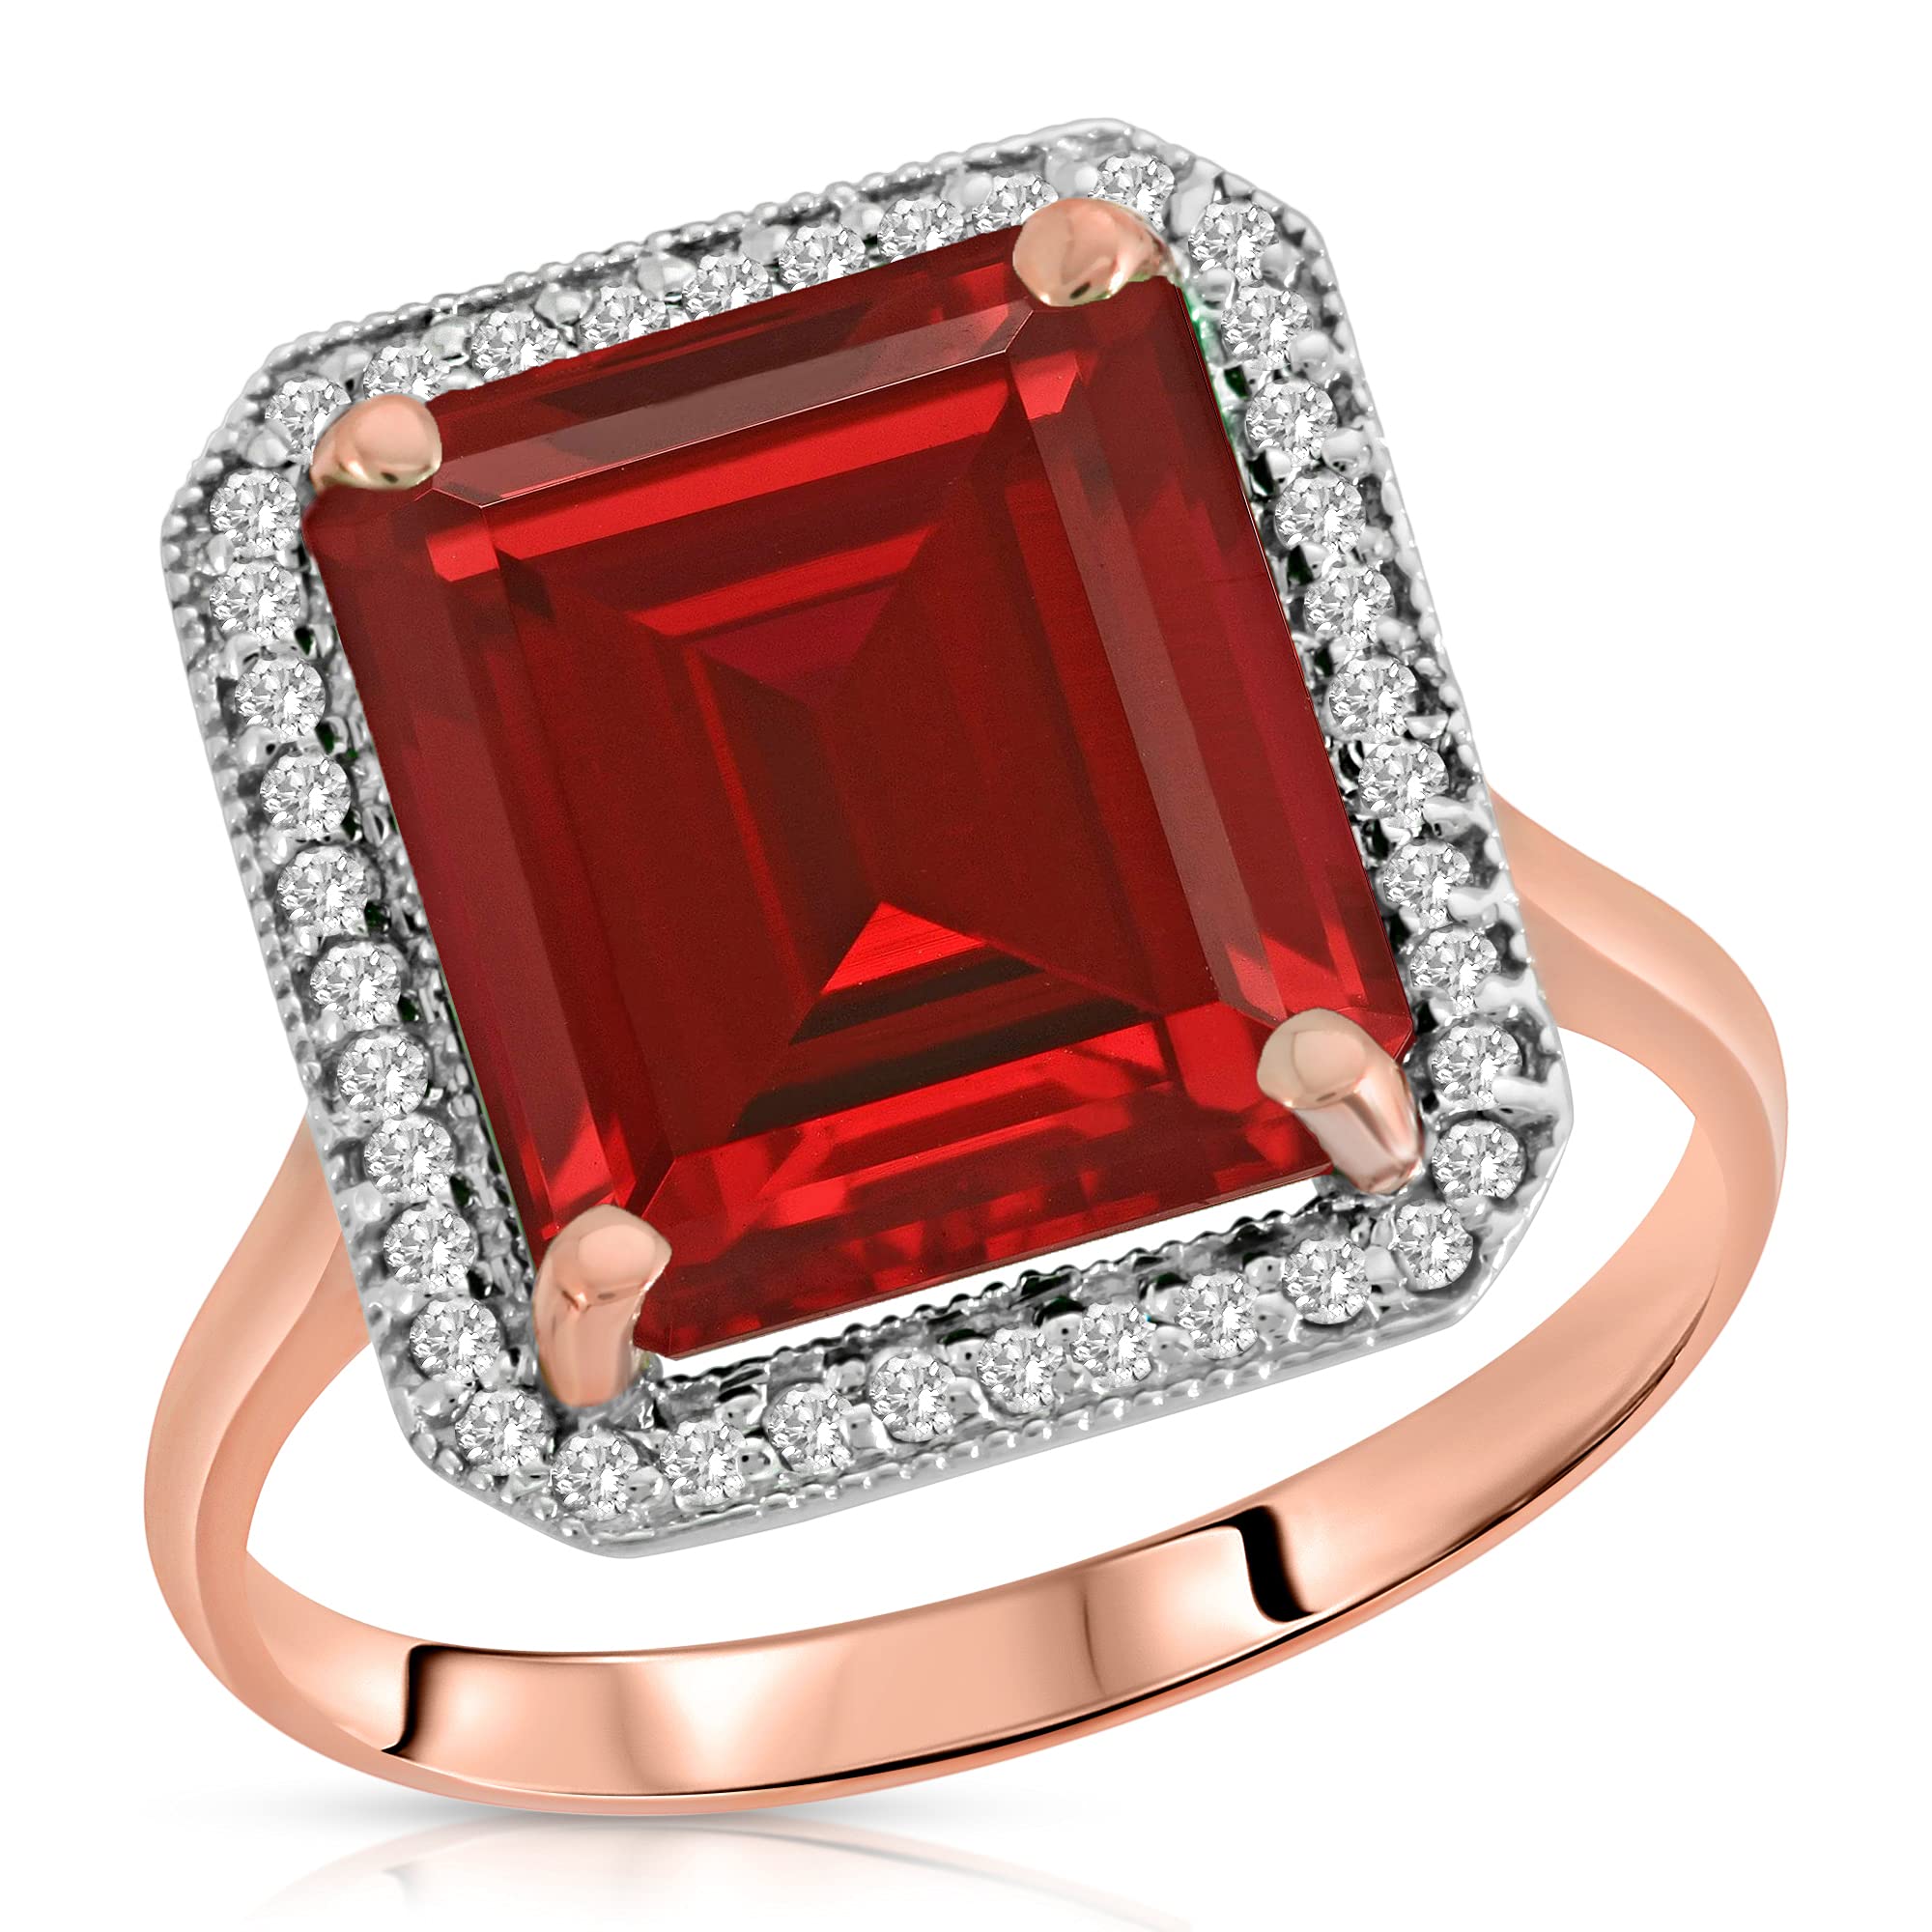 Galaxy Gold GG 7.45 ct 14k Solid Gold Emerald Cut Ruby Halo Diamond Ring 4894 (Rose-Gold, 9.5)